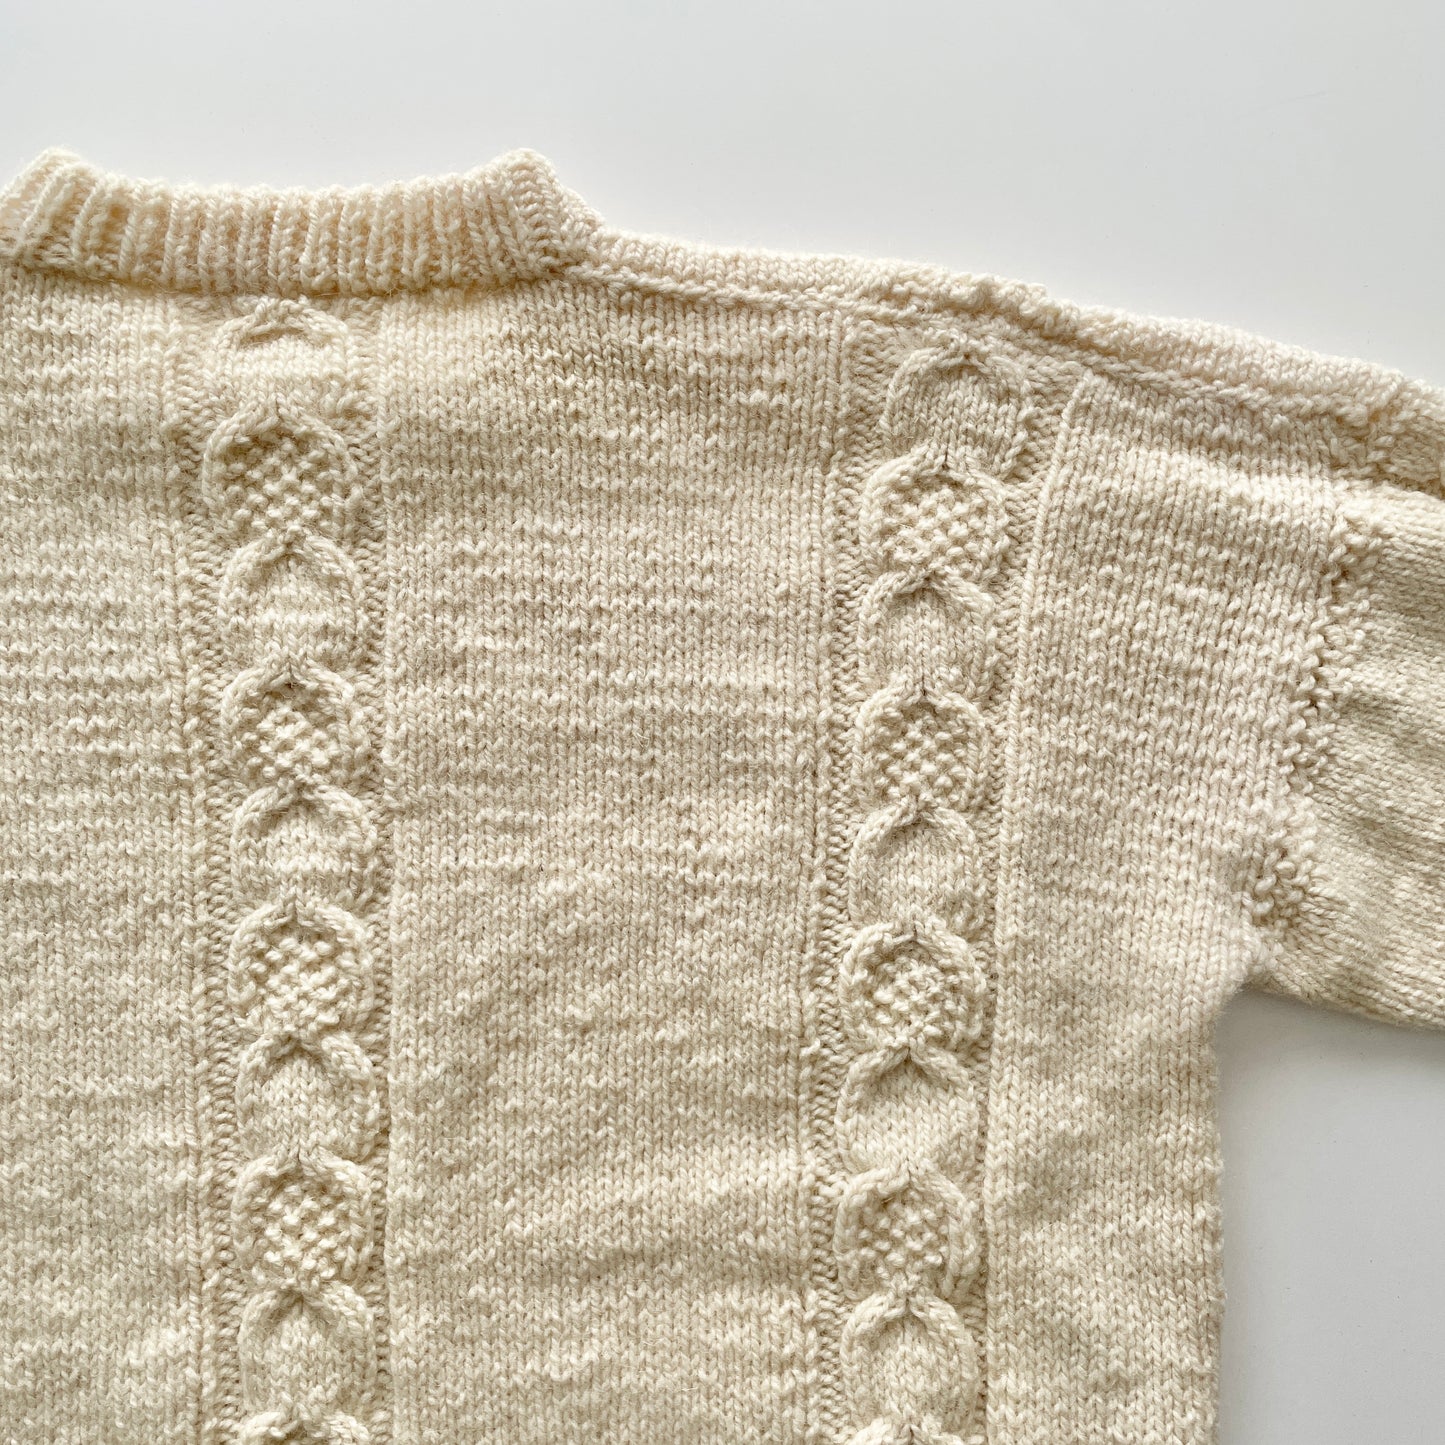 Vintage Handmade Moss Stitch Cable Knit Sweater